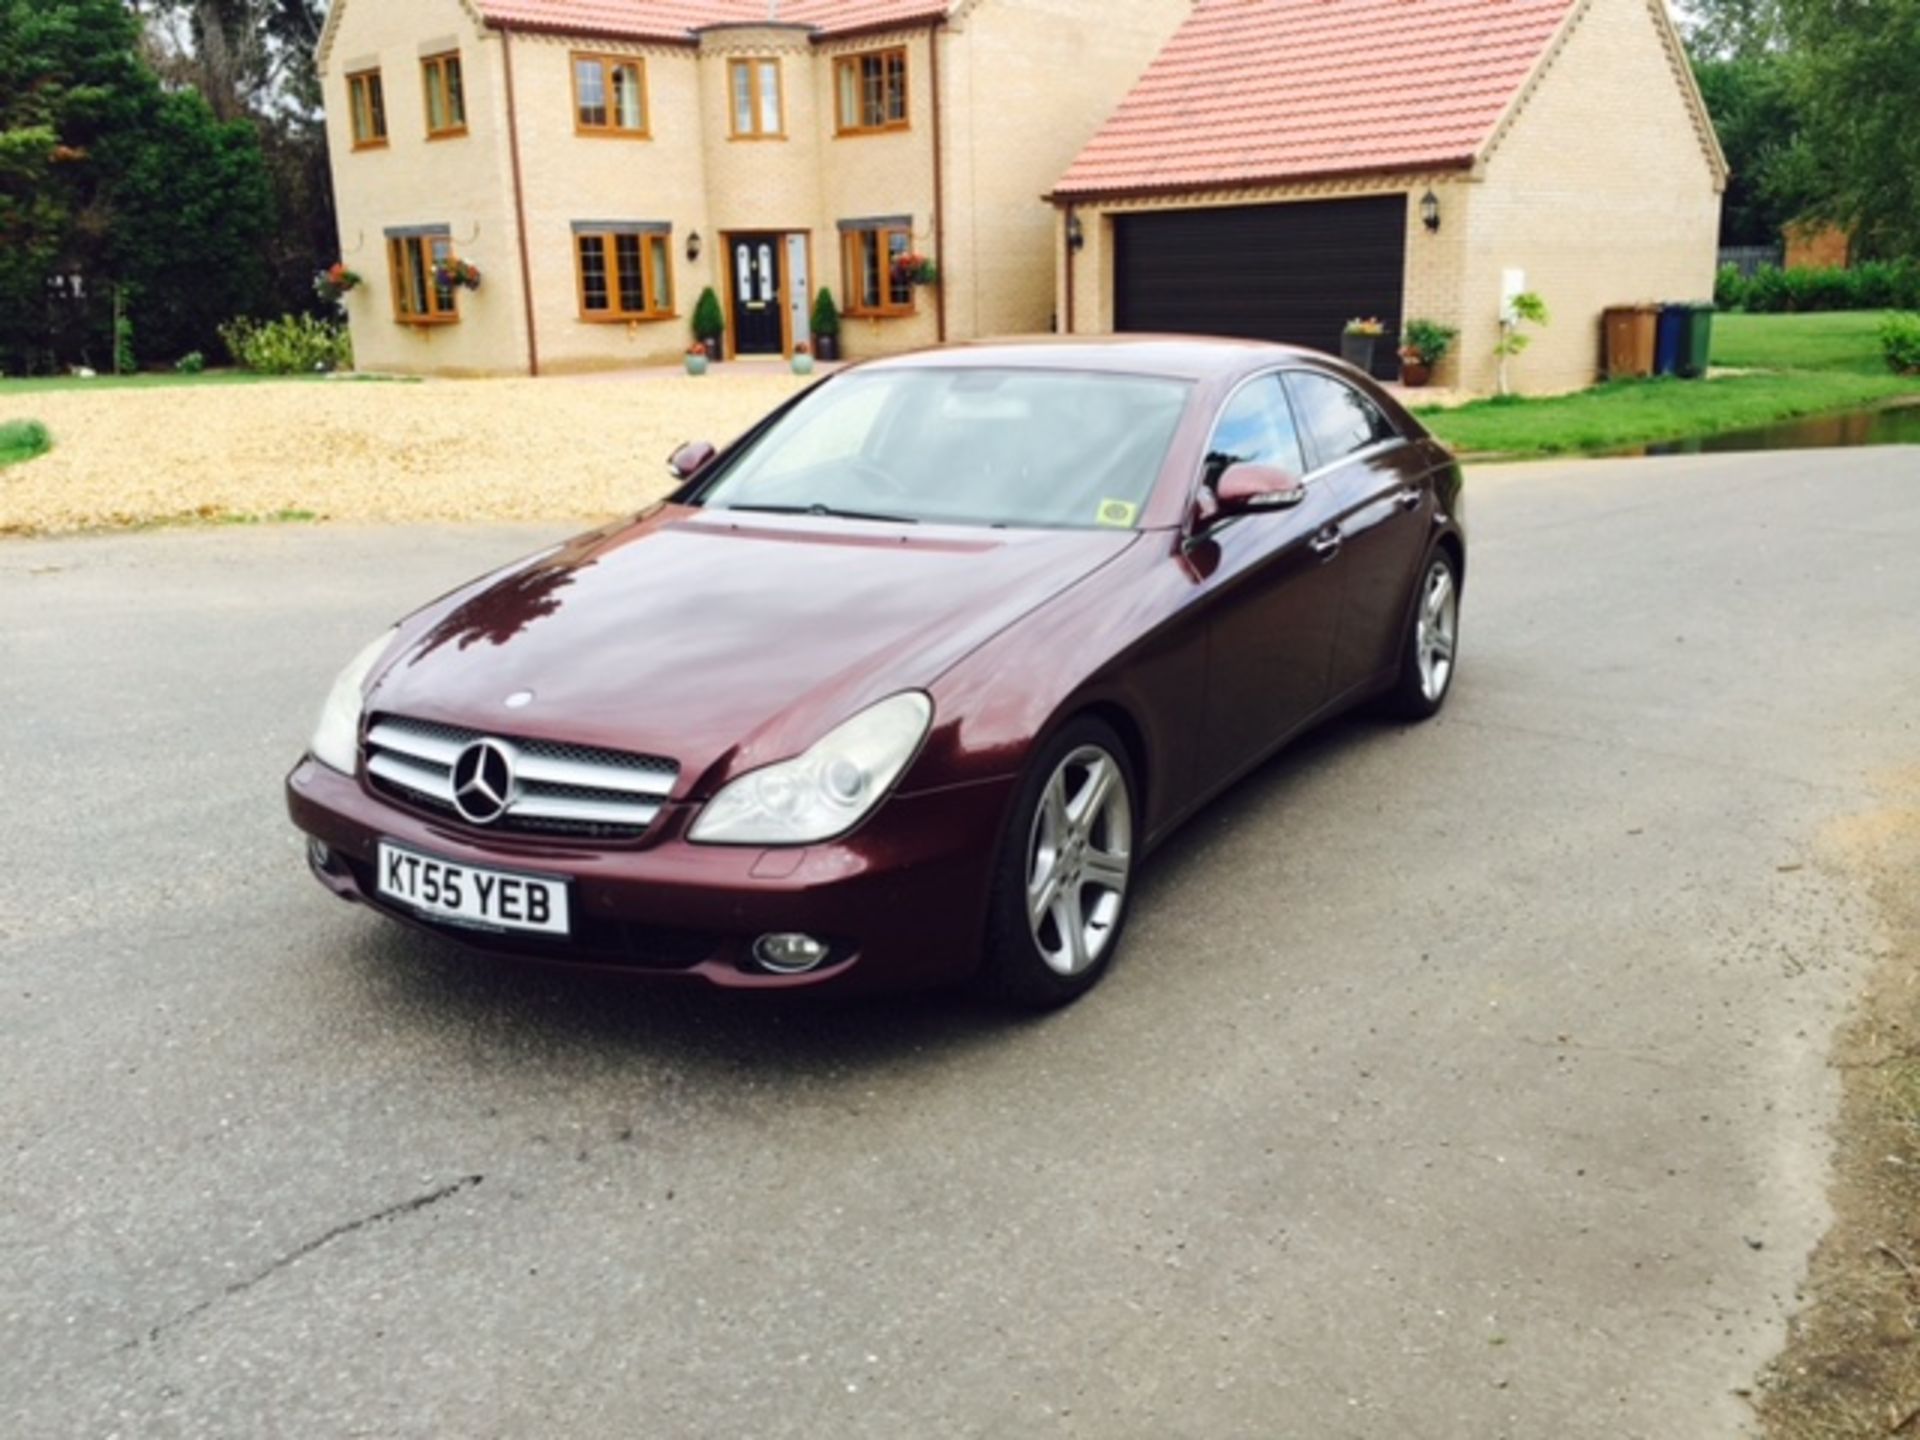 '55' Mercedes CLS 320CDI Coupe, Automatic, MOT 26/05/2016,  272k miles, 12 Service Stamps. - Image 2 of 12